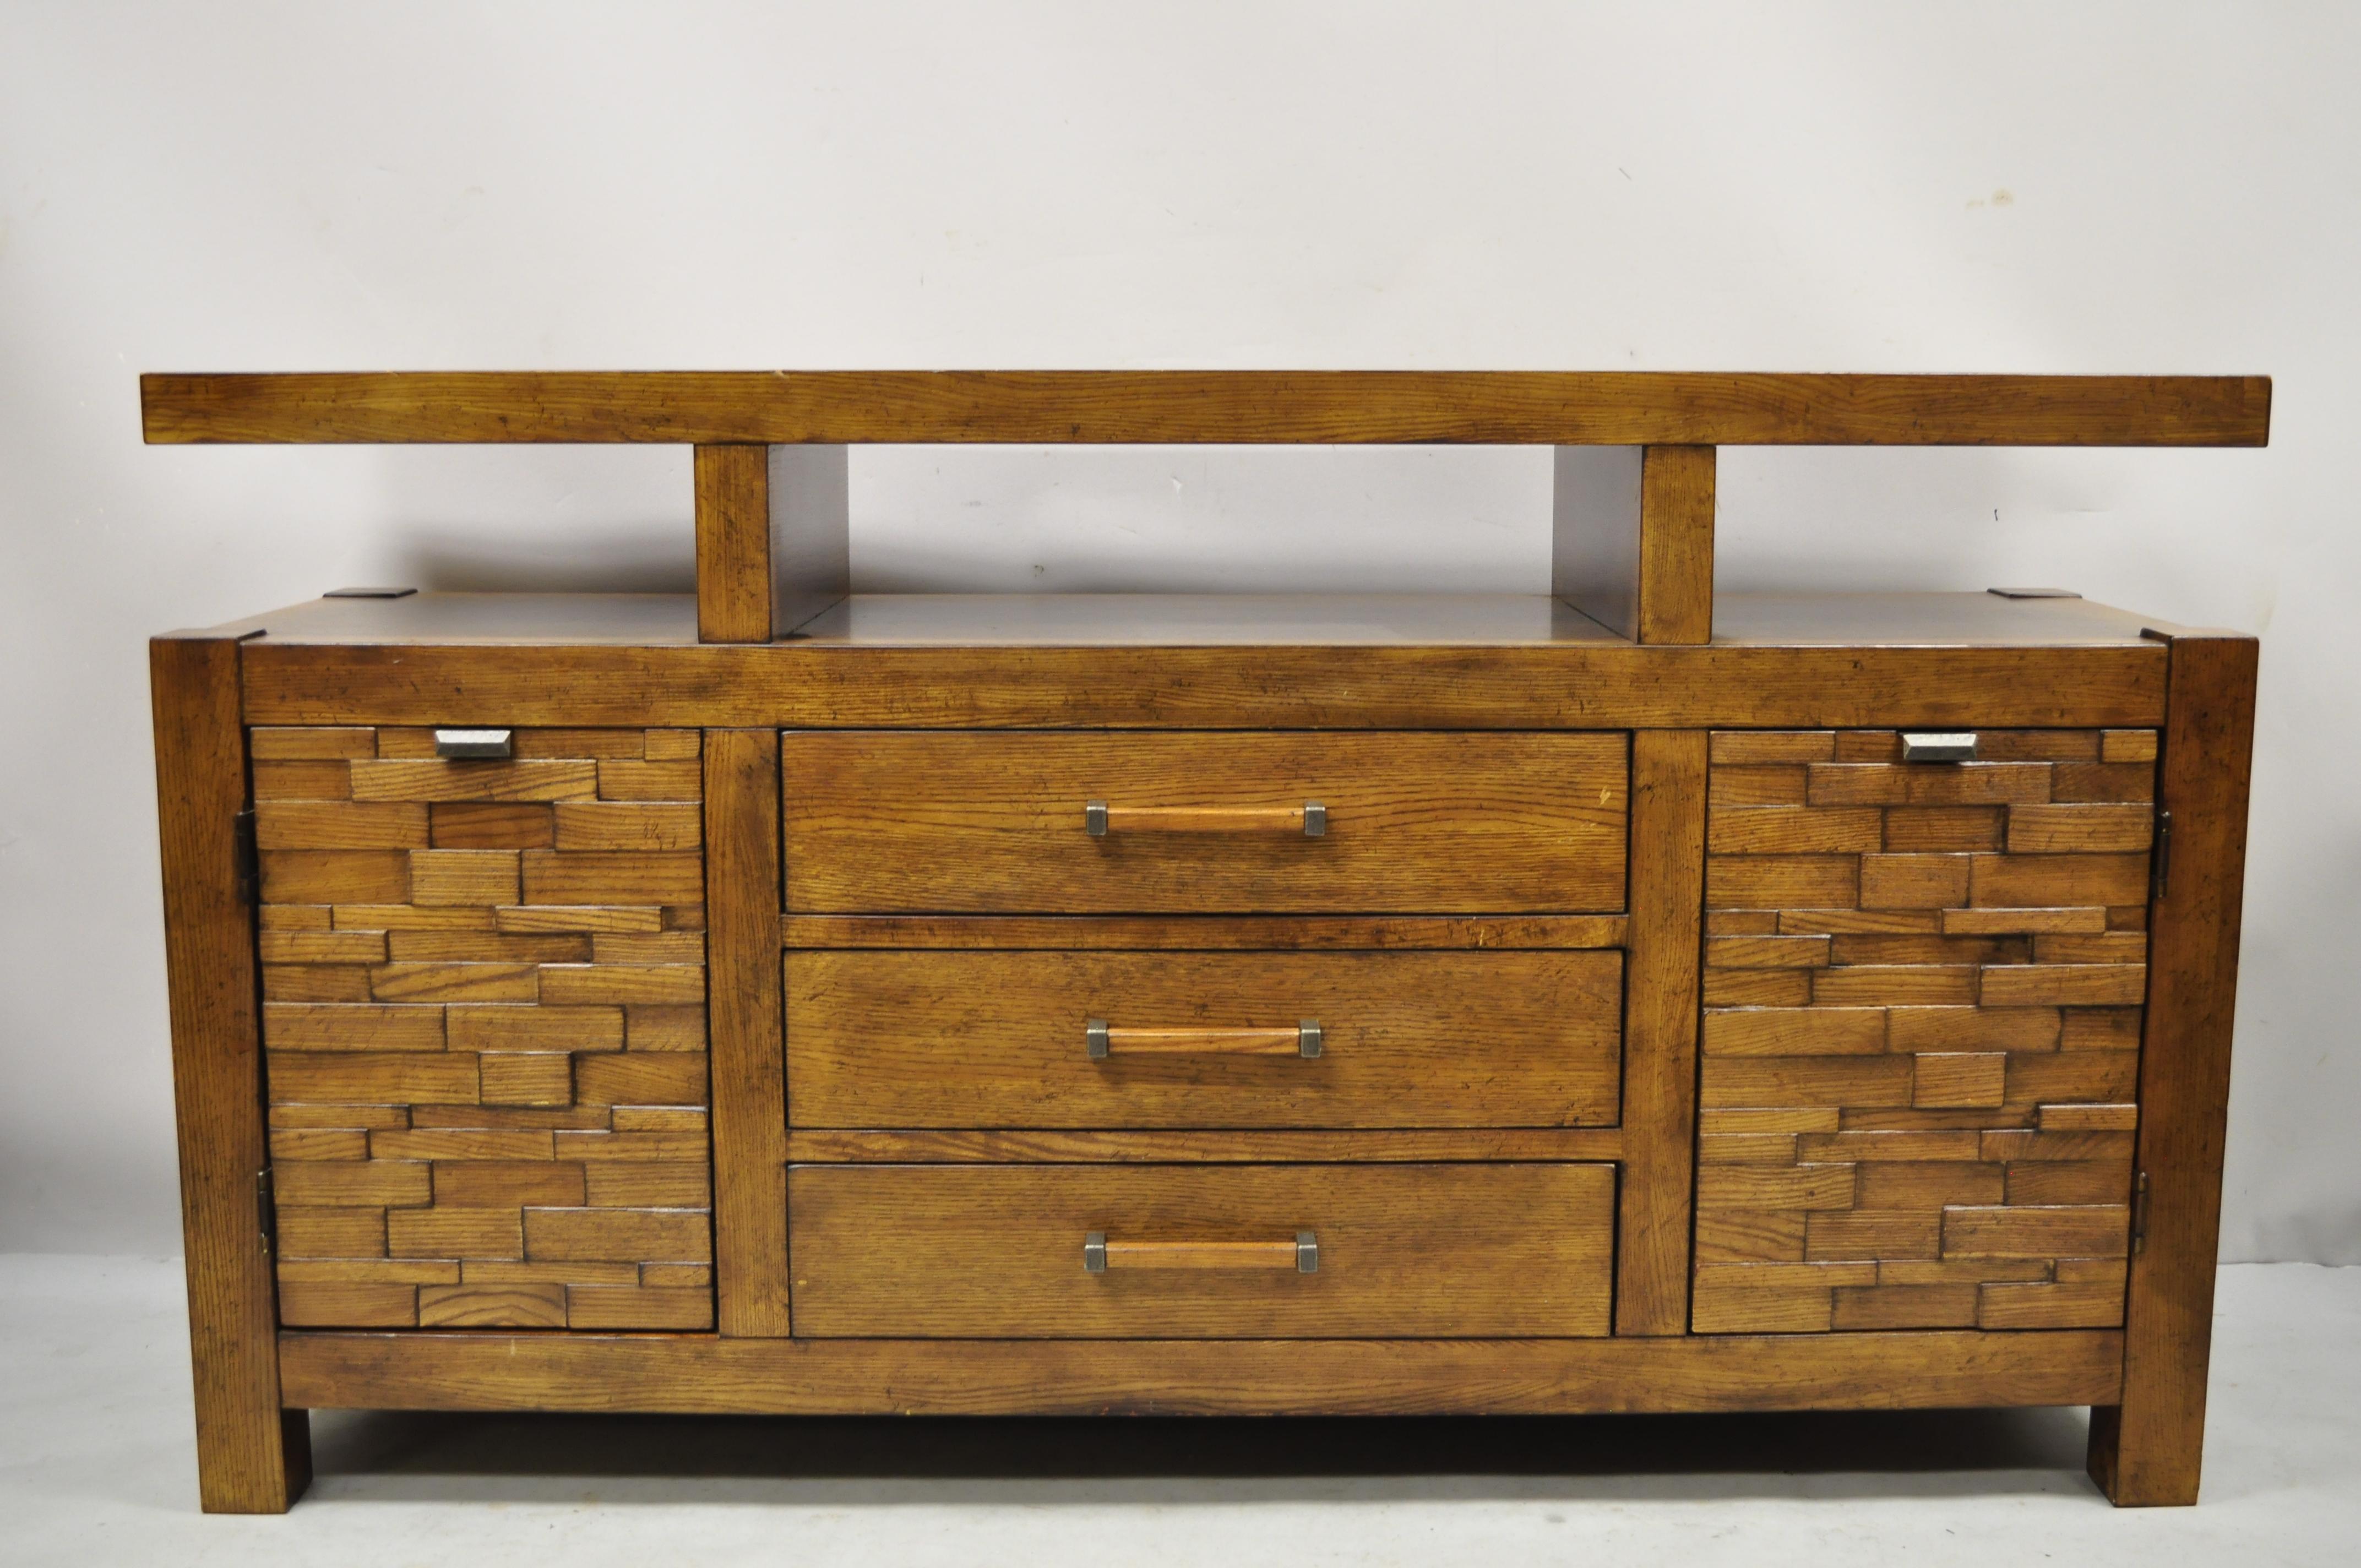 Schnadig Home Collections river run oak sideboard buffet granite top. Item features wood construction, beautiful wood grain, distressed finish, 2 swing door, original label, 3 dovetailed drawer, very nice item, great style and form. Circa 2014.